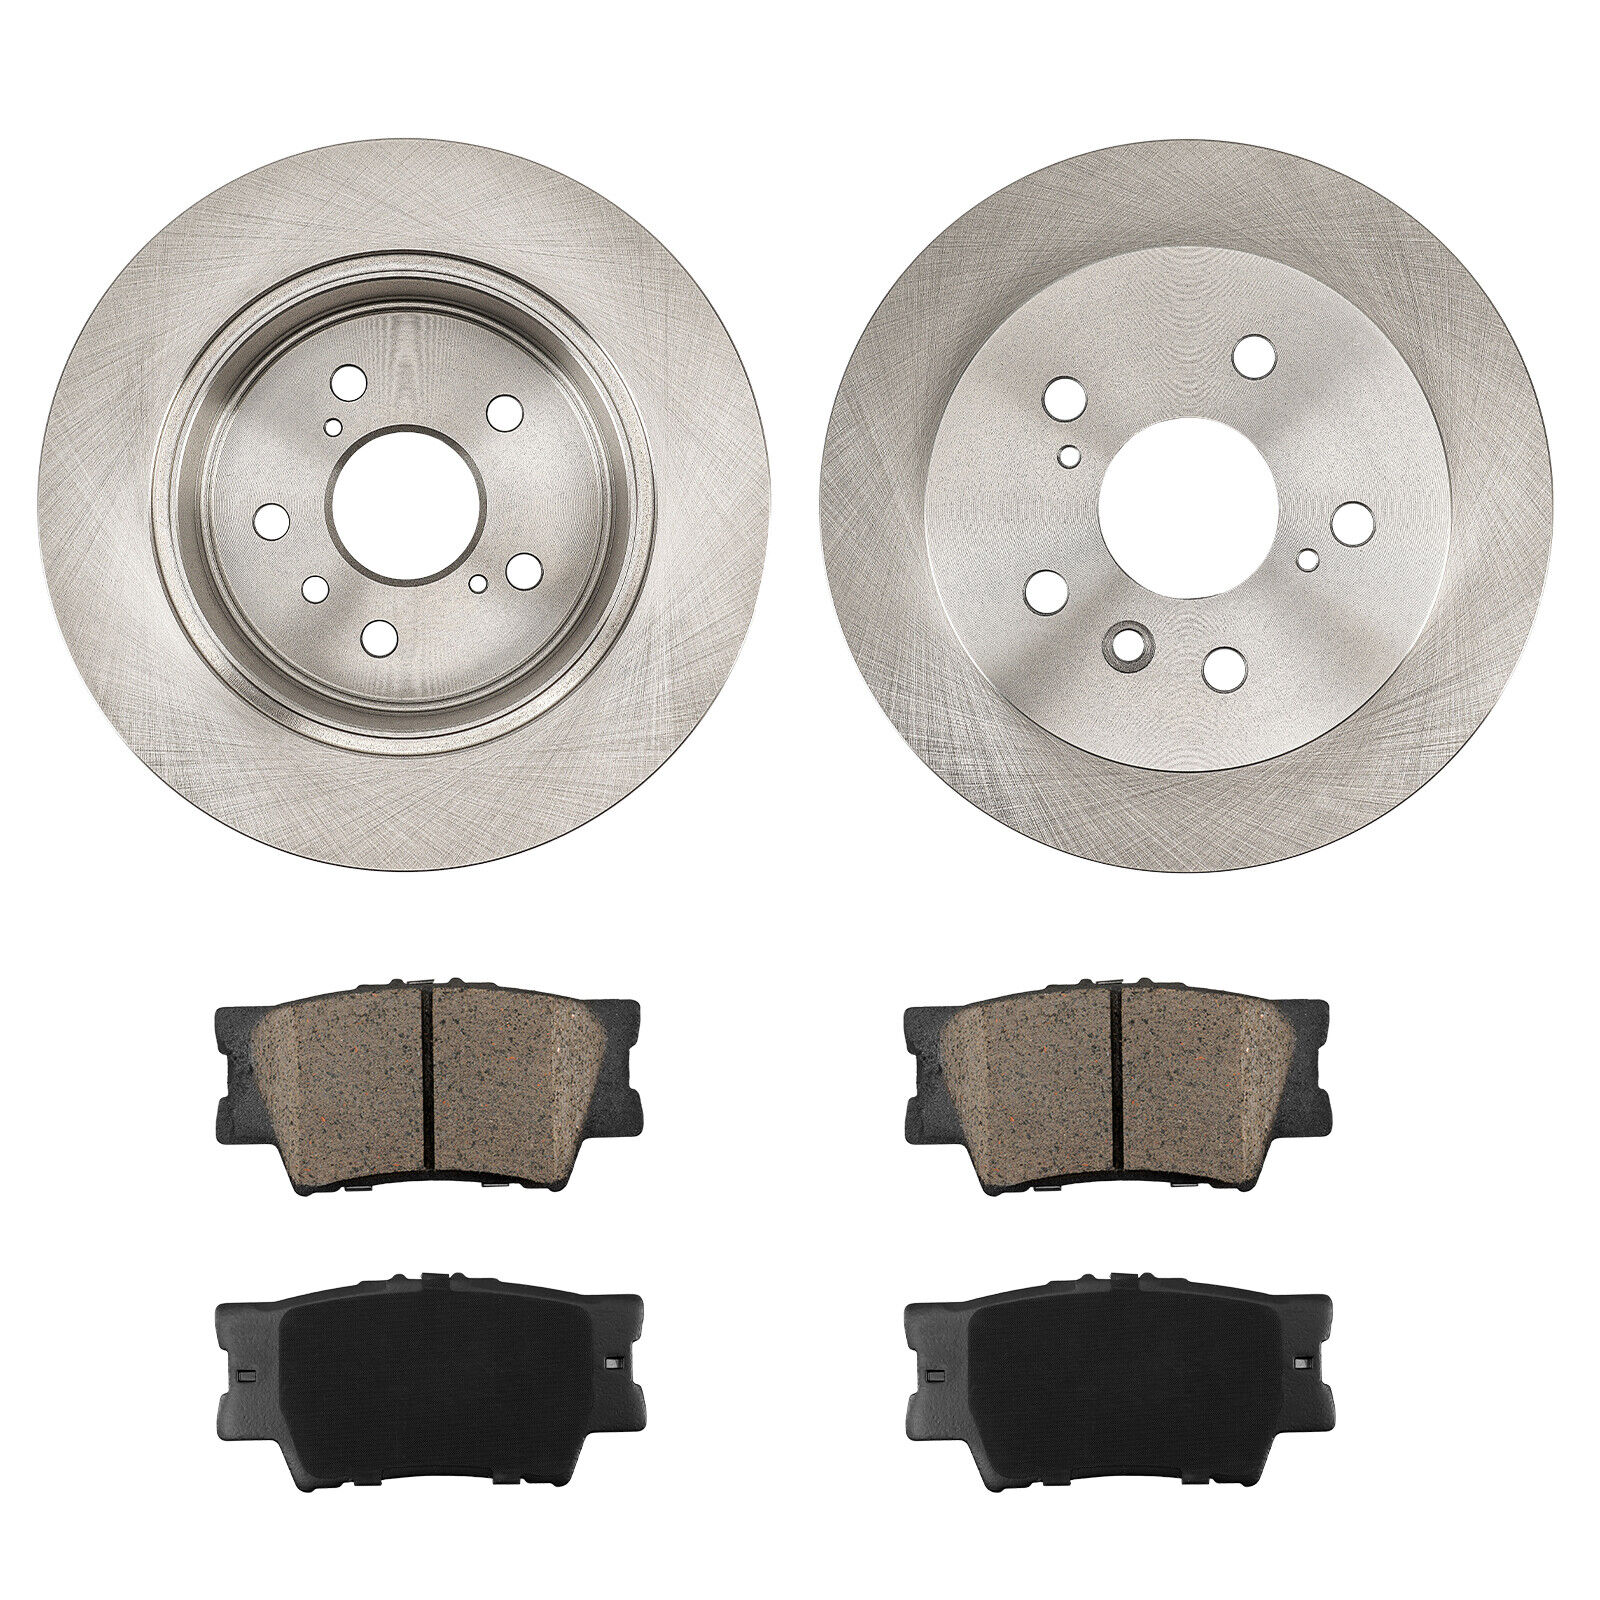 Rear Solid Brake Rotors W/ Ceramic Pads For 2013-2017 ES300h ES350 Avalon Camry